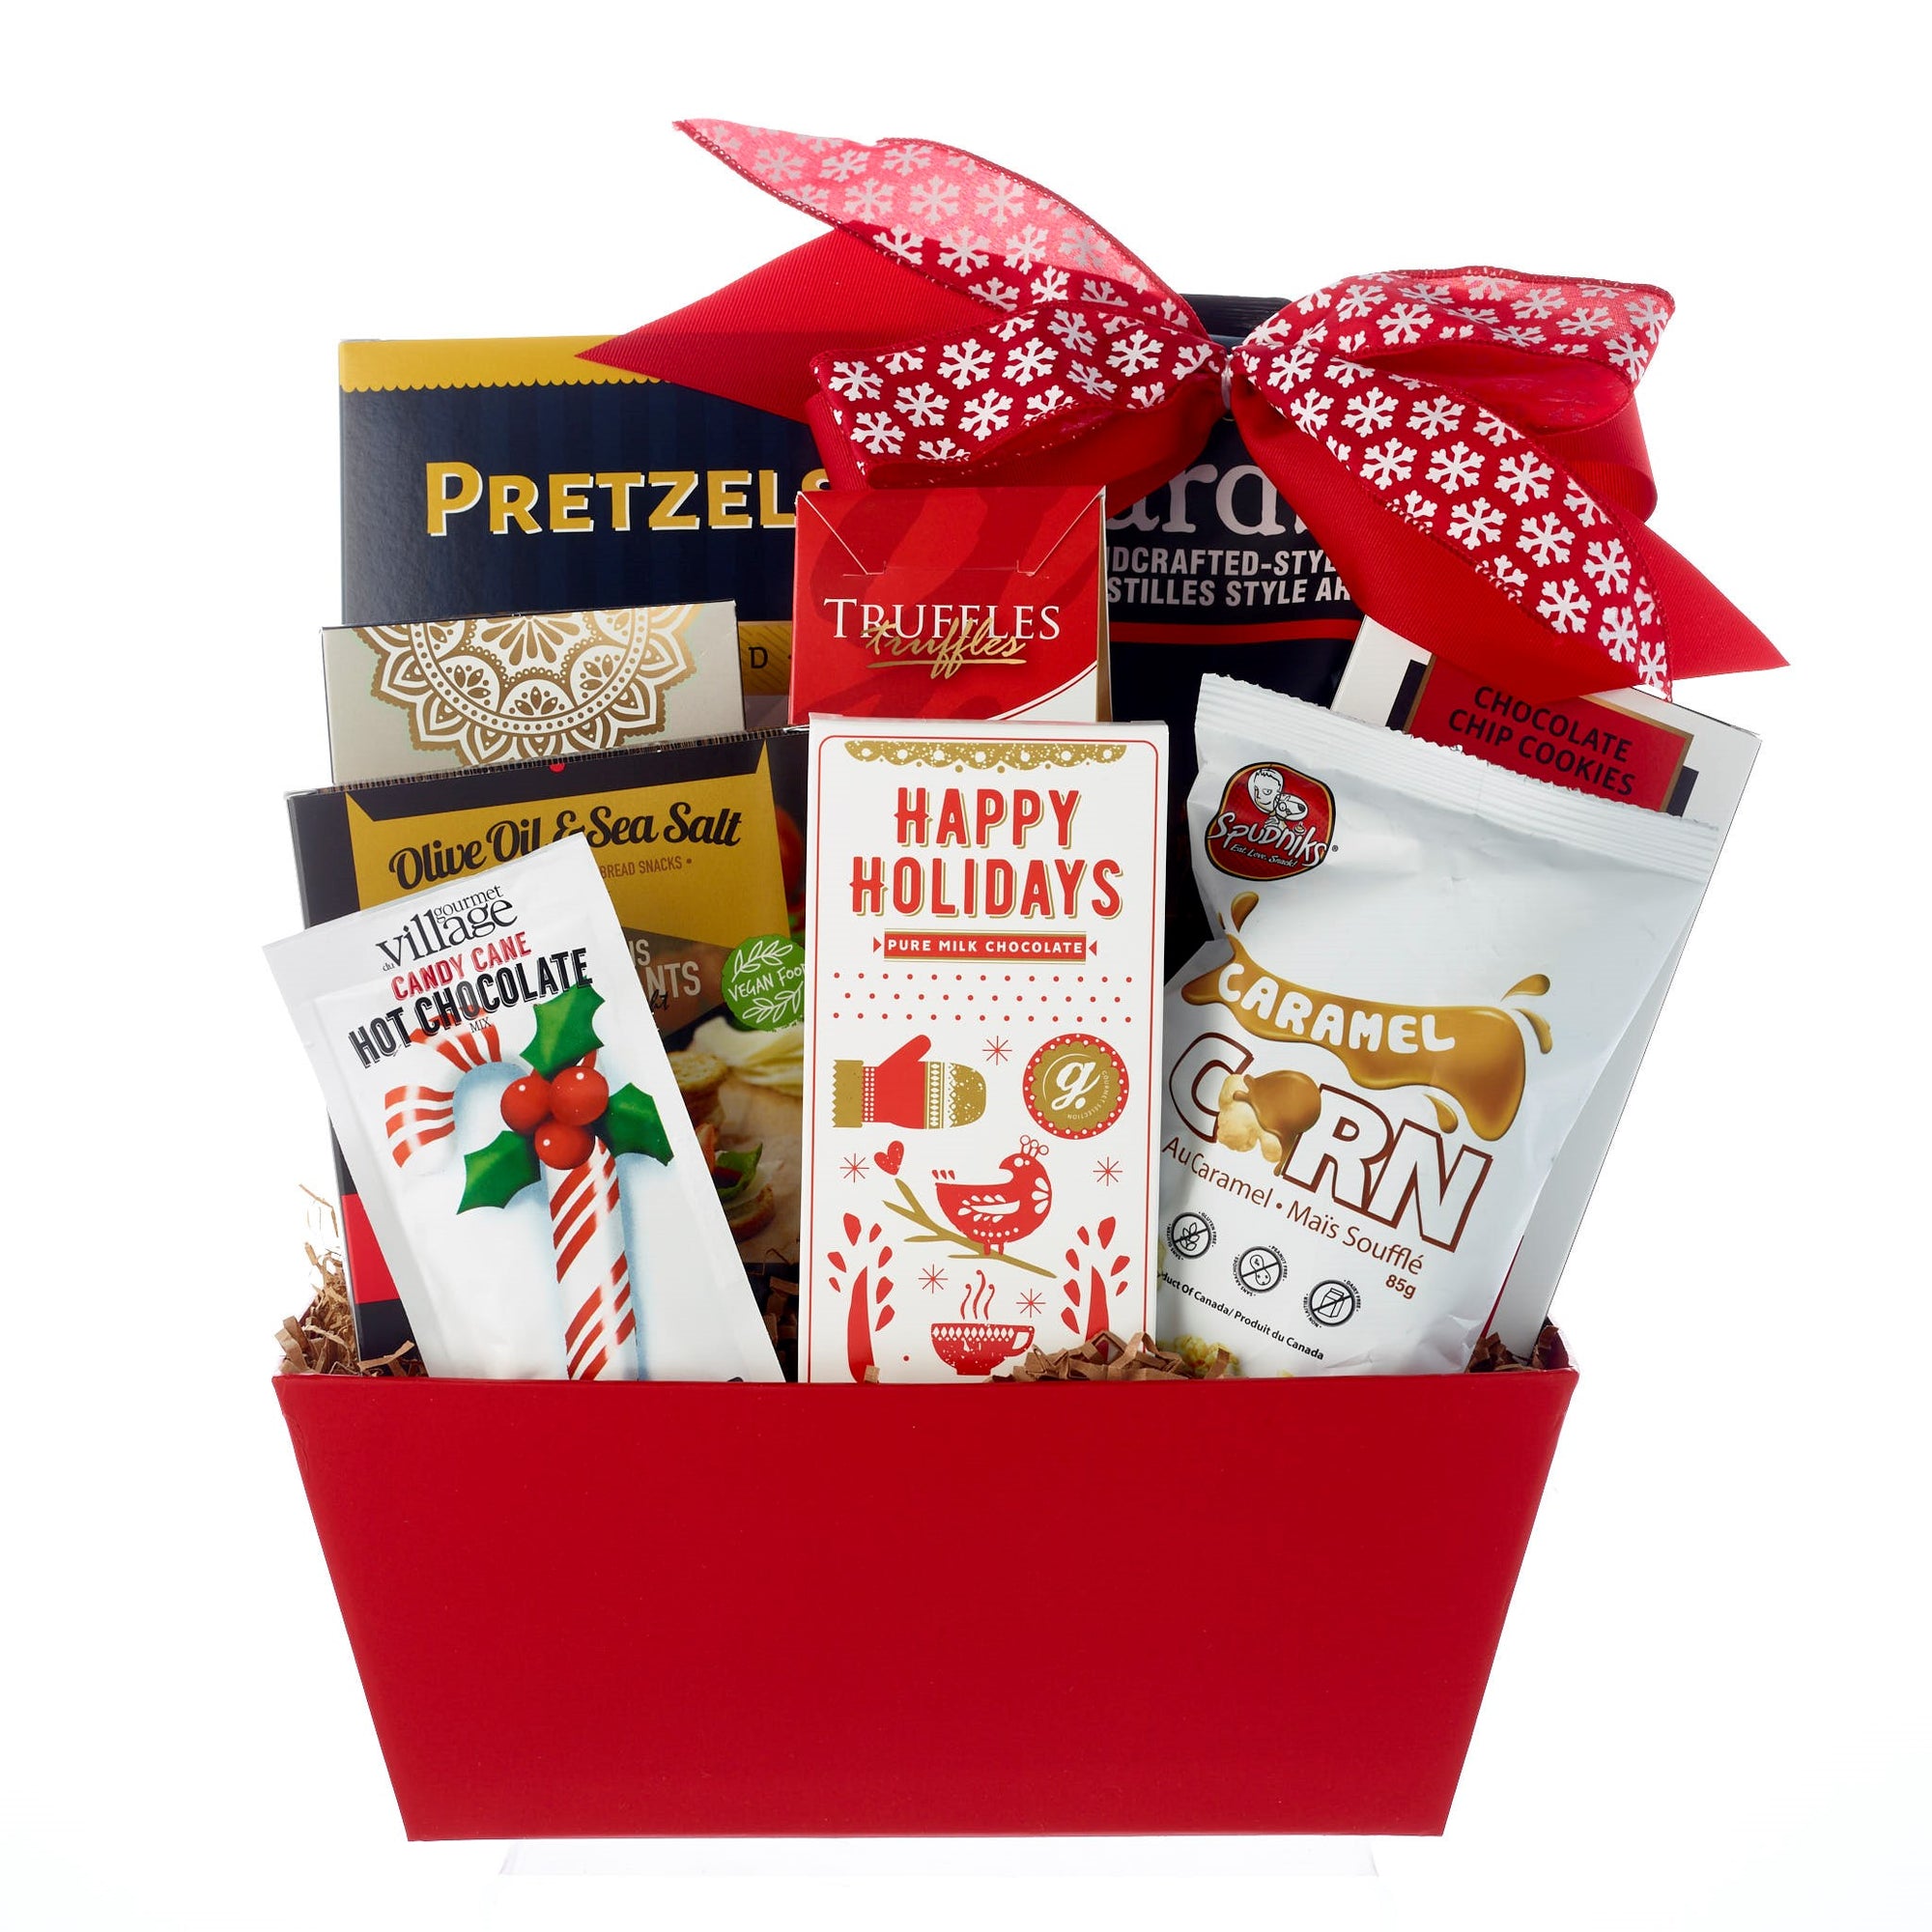 Large corporate Christmas baskets Toronto delivery